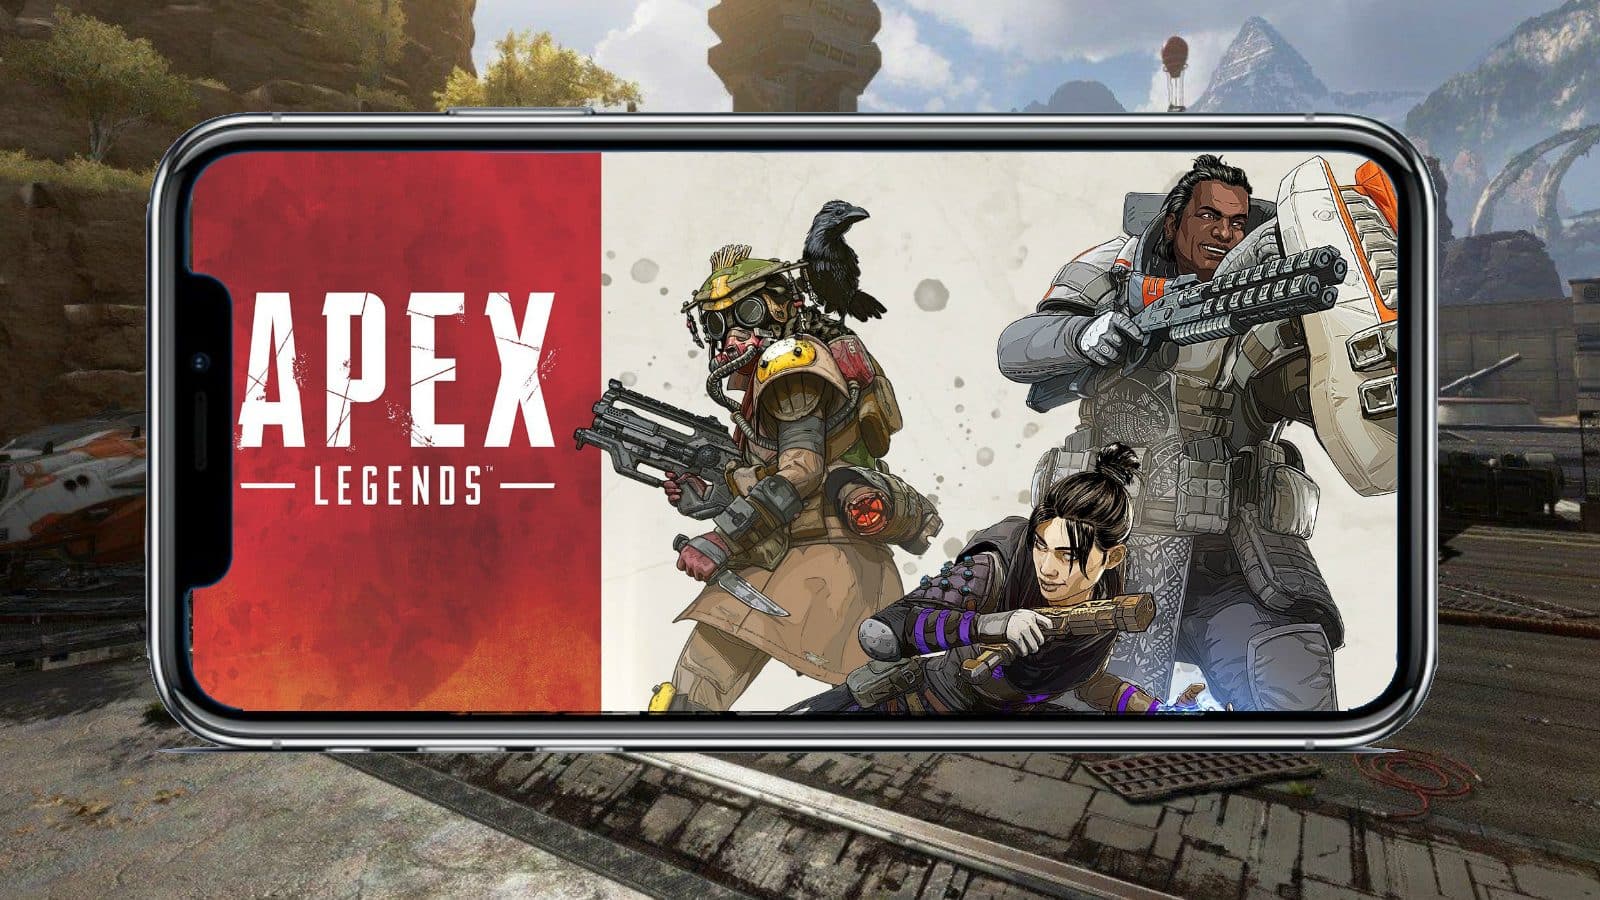 Respawn on X: The Soft Launch for Apex Mobile is coming! For